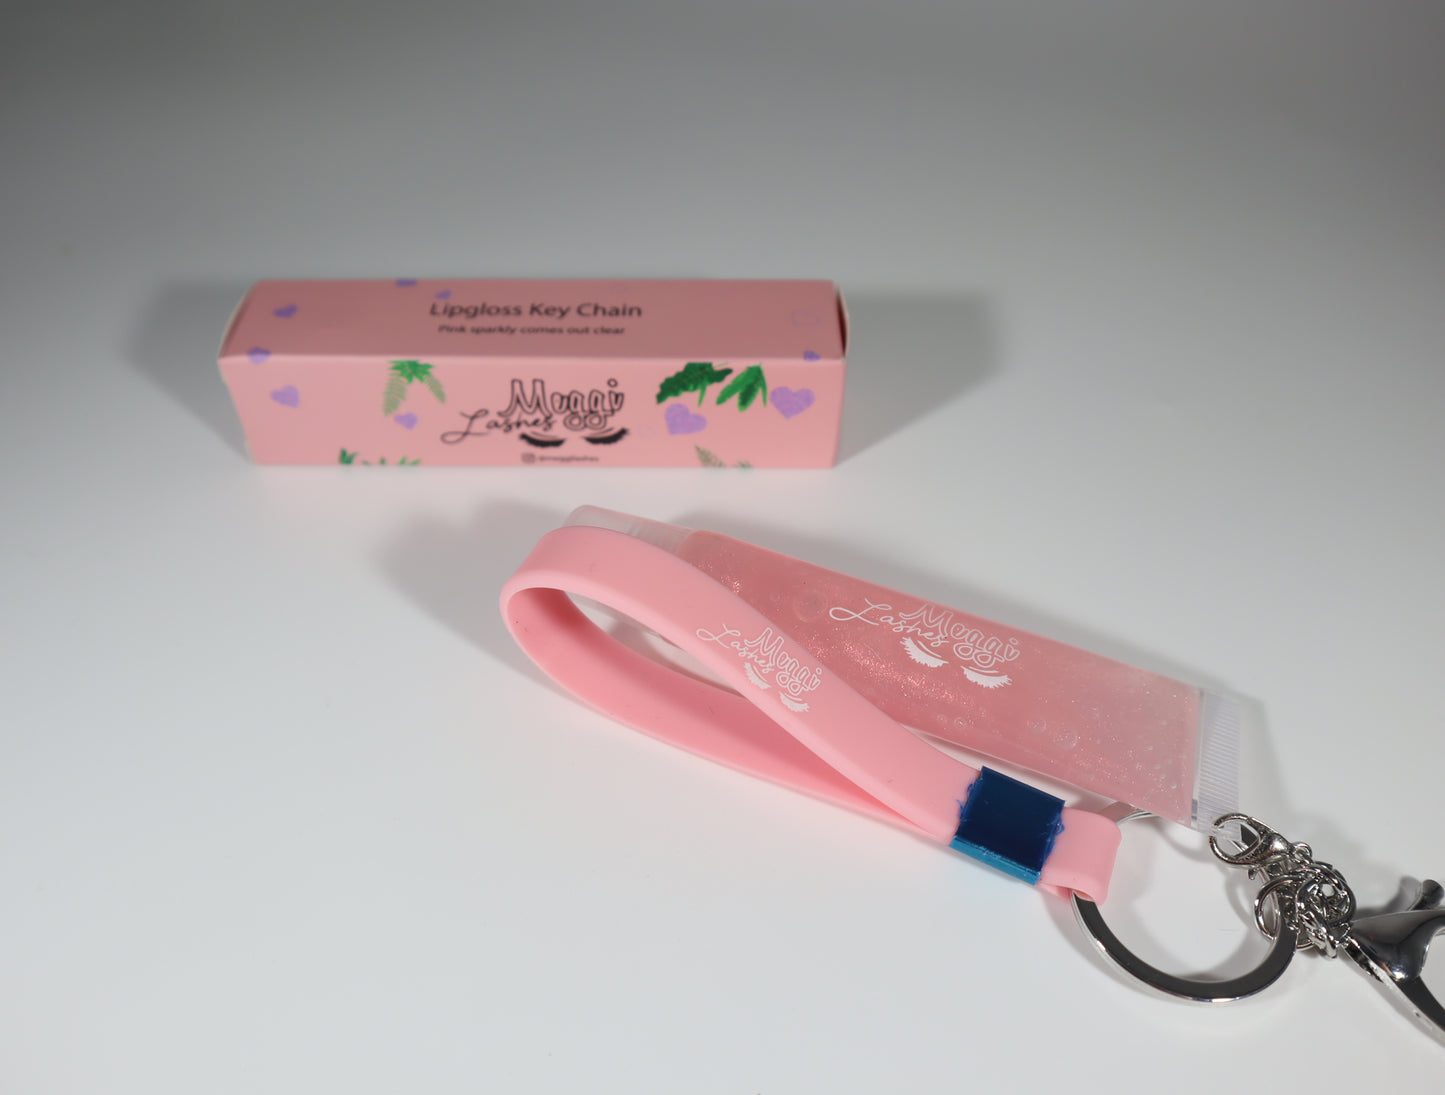 Cotton candy lipgloss keychain (candy floss)